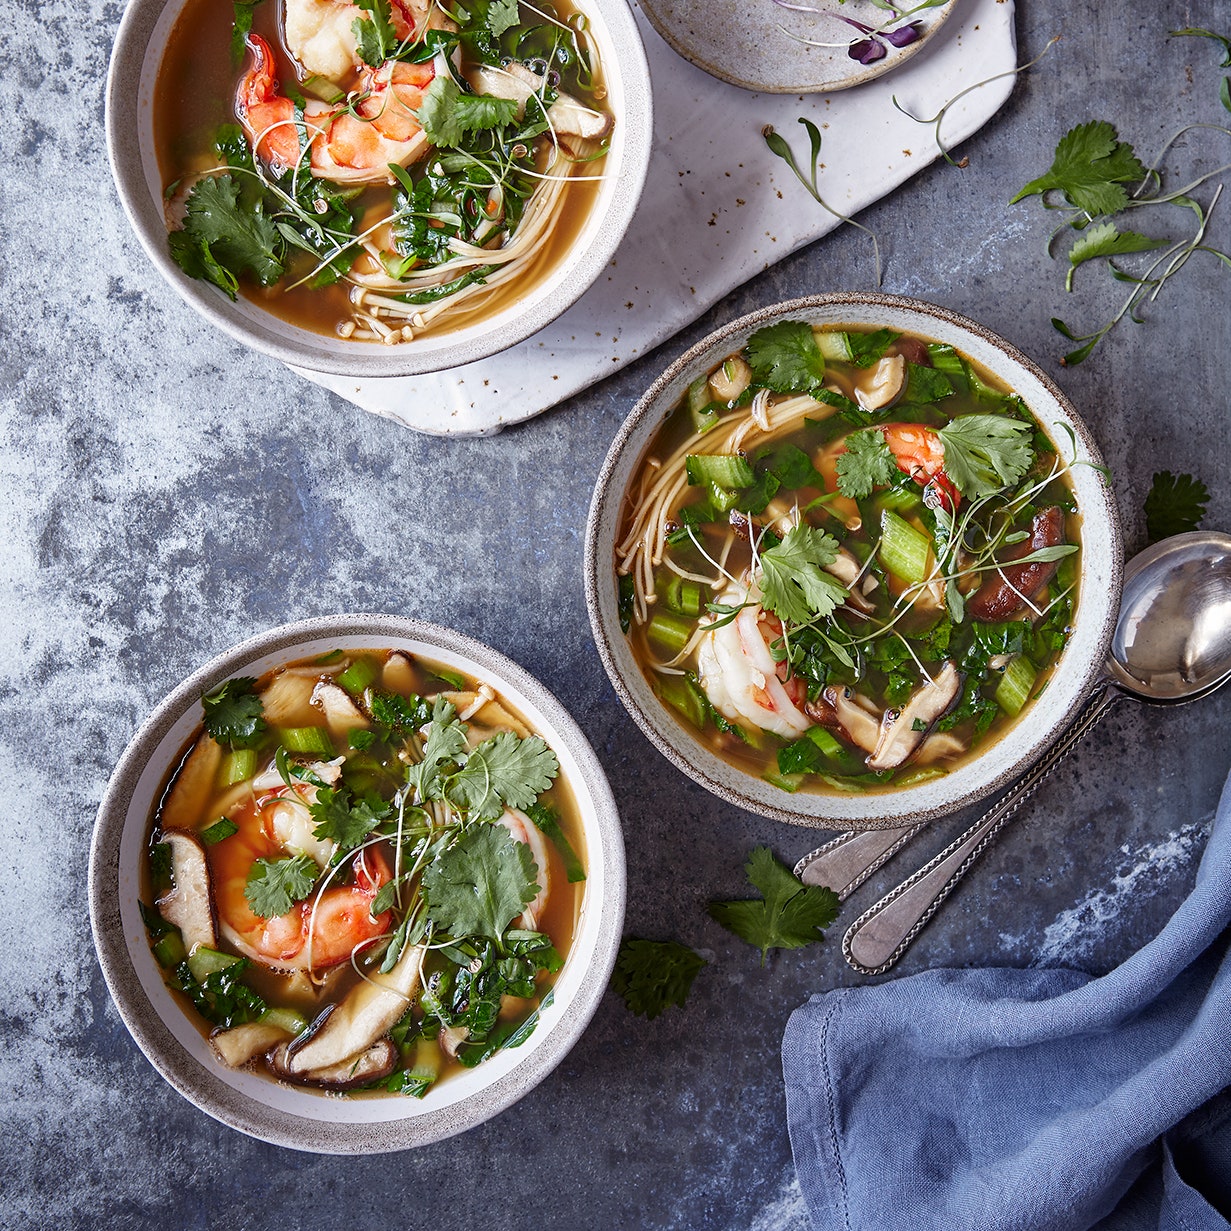 Hot and sour prawn soup